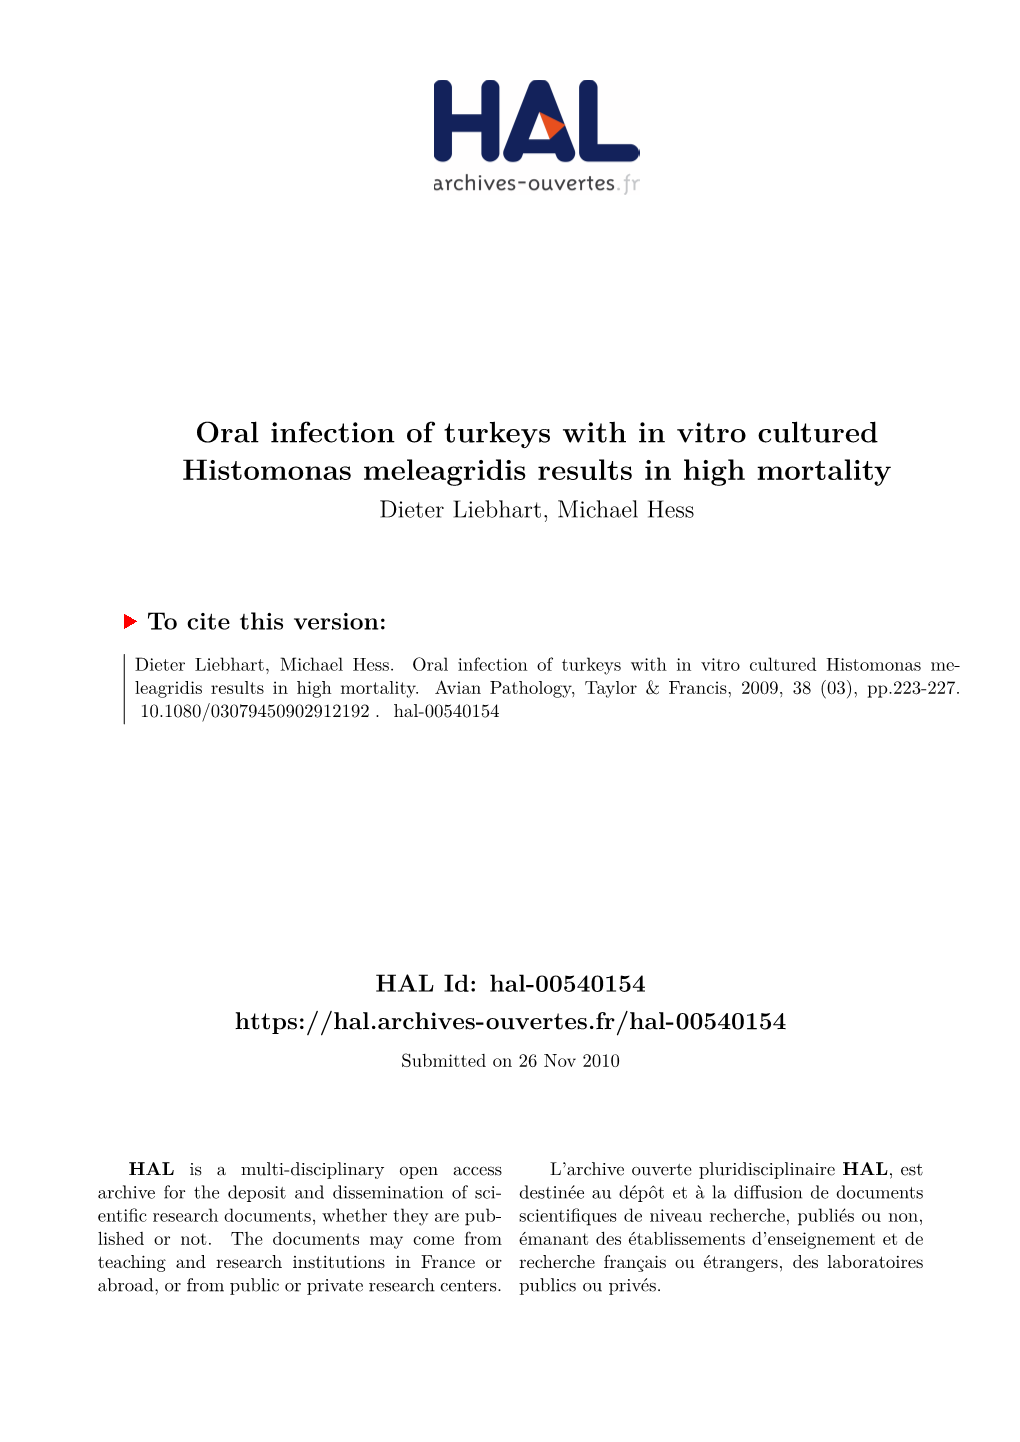 Oral Infection of Turkeys with in Vitro Cultured Histomonas Meleagridis Results in High Mortality Dieter Liebhart, Michael Hess